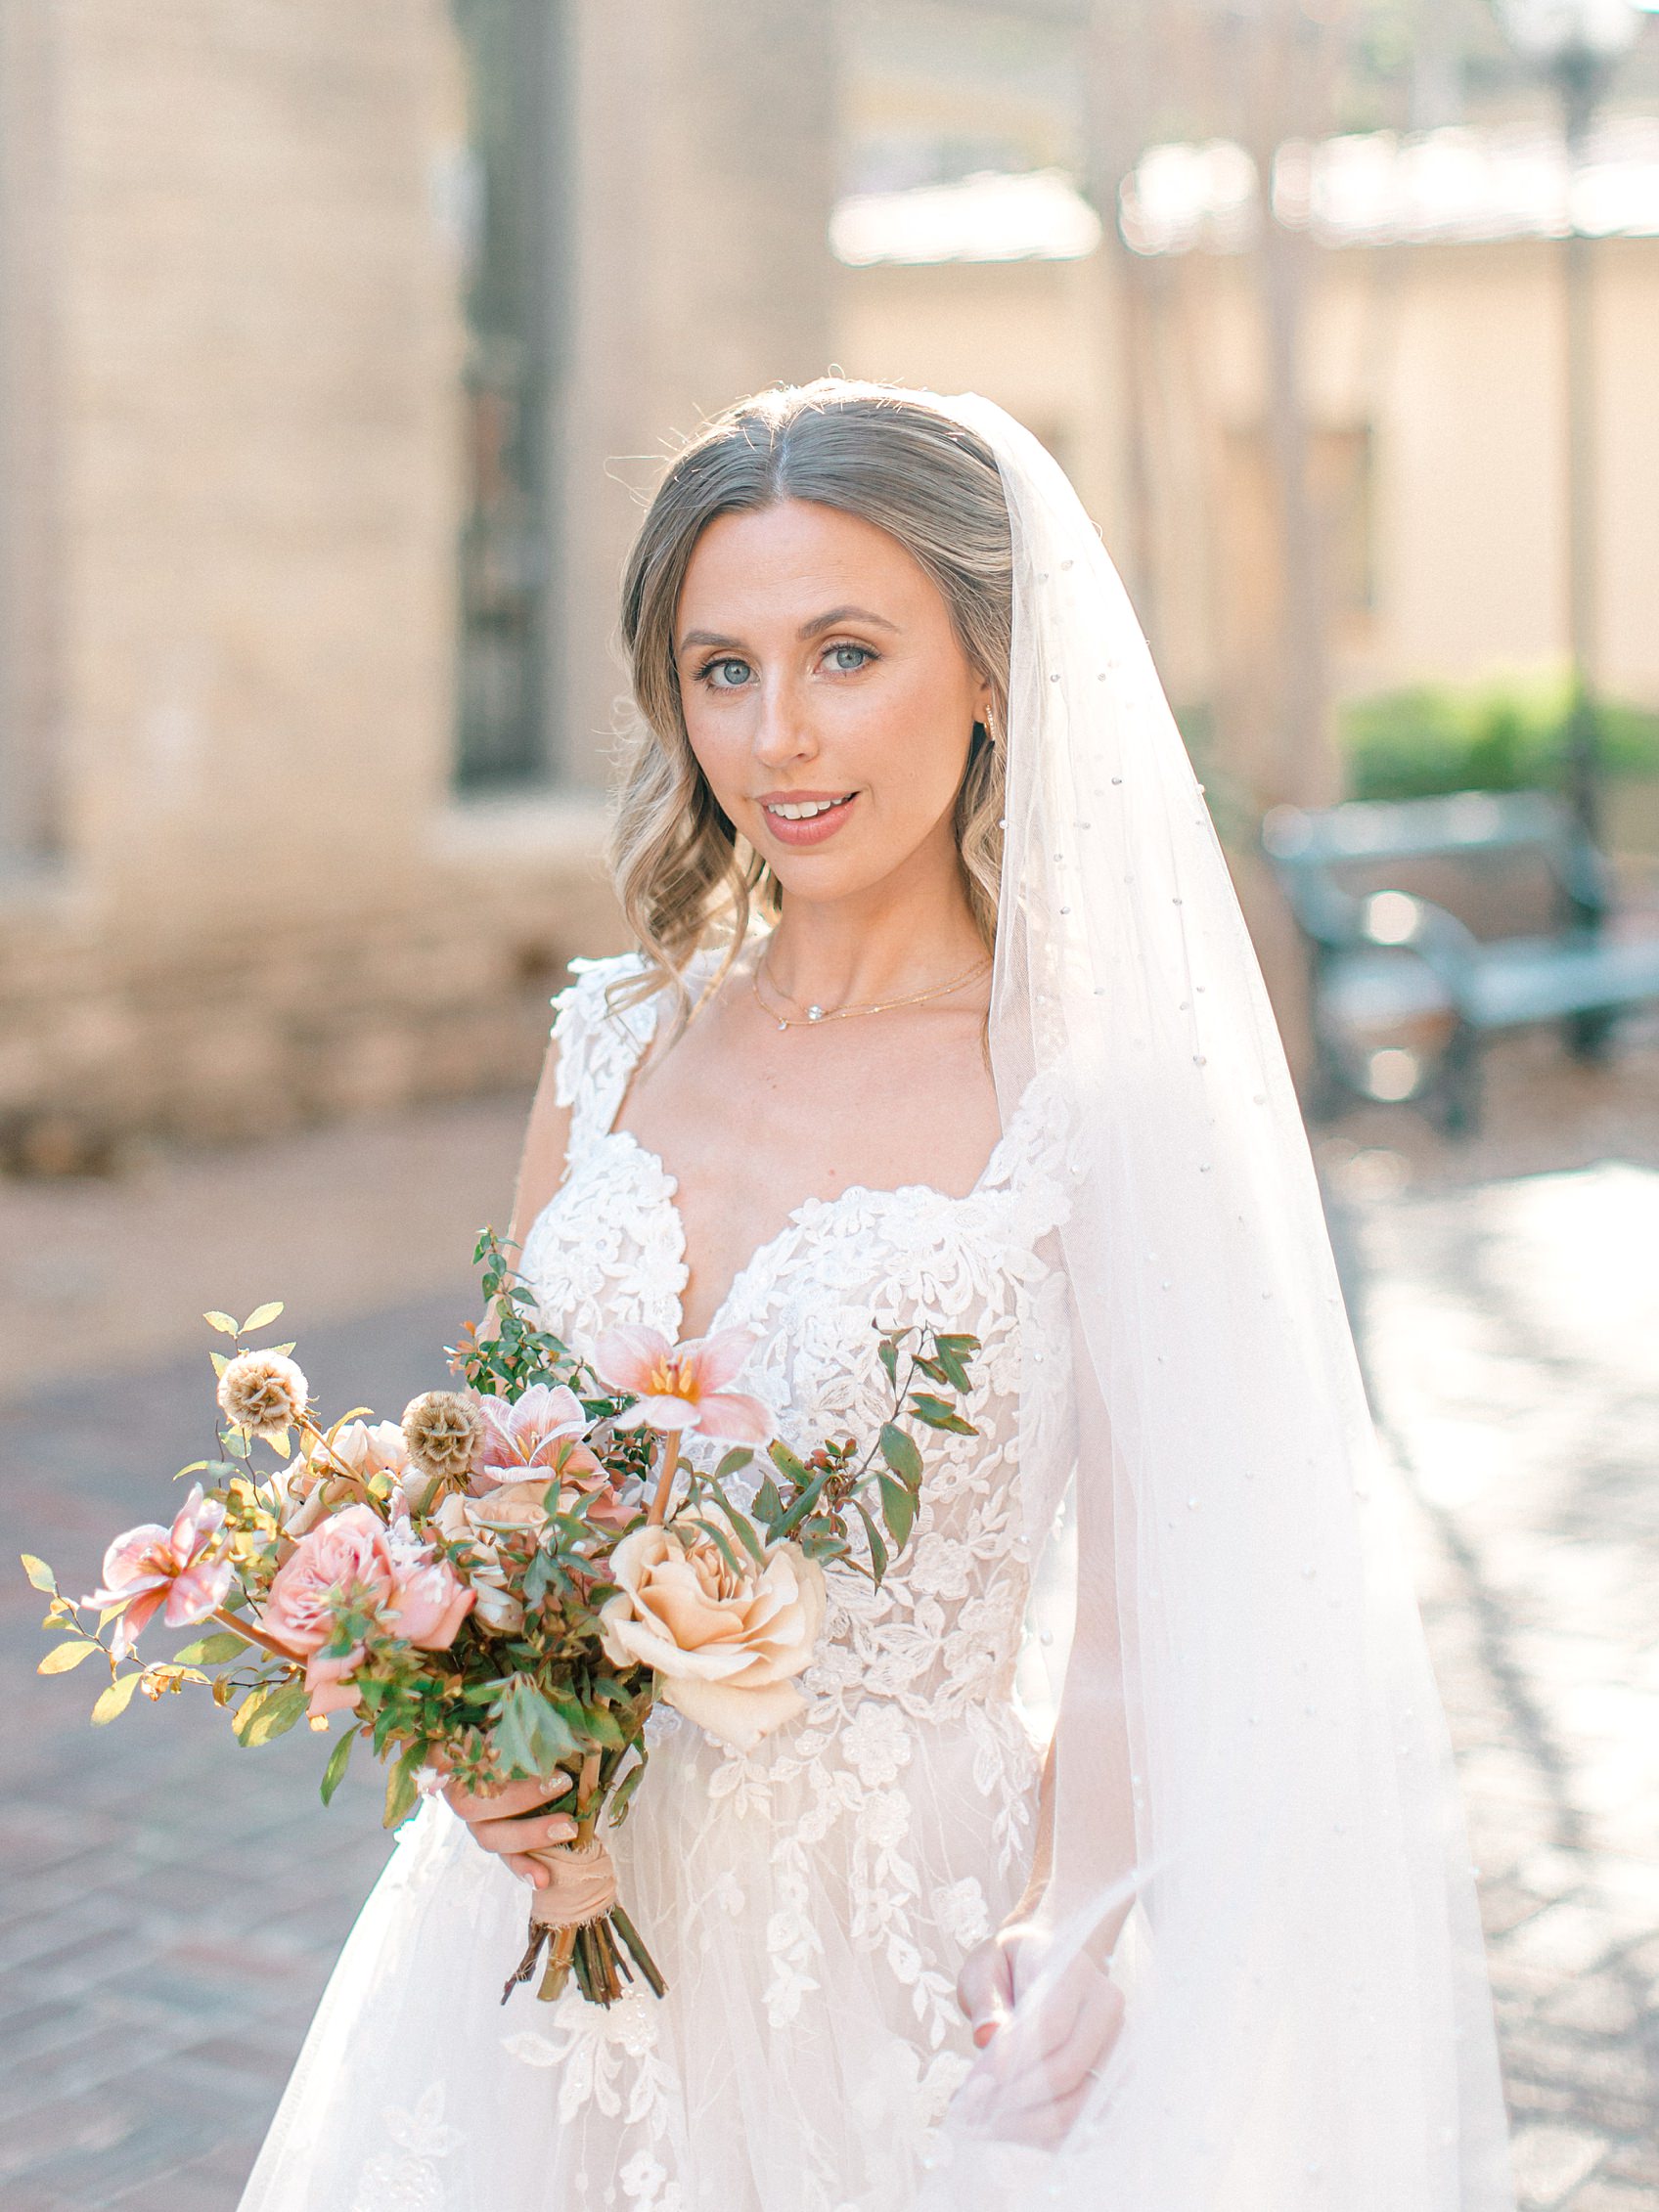 Downtown San Antonio Bridal Photography Session by Allison Jeffers Wedding Photography 0009